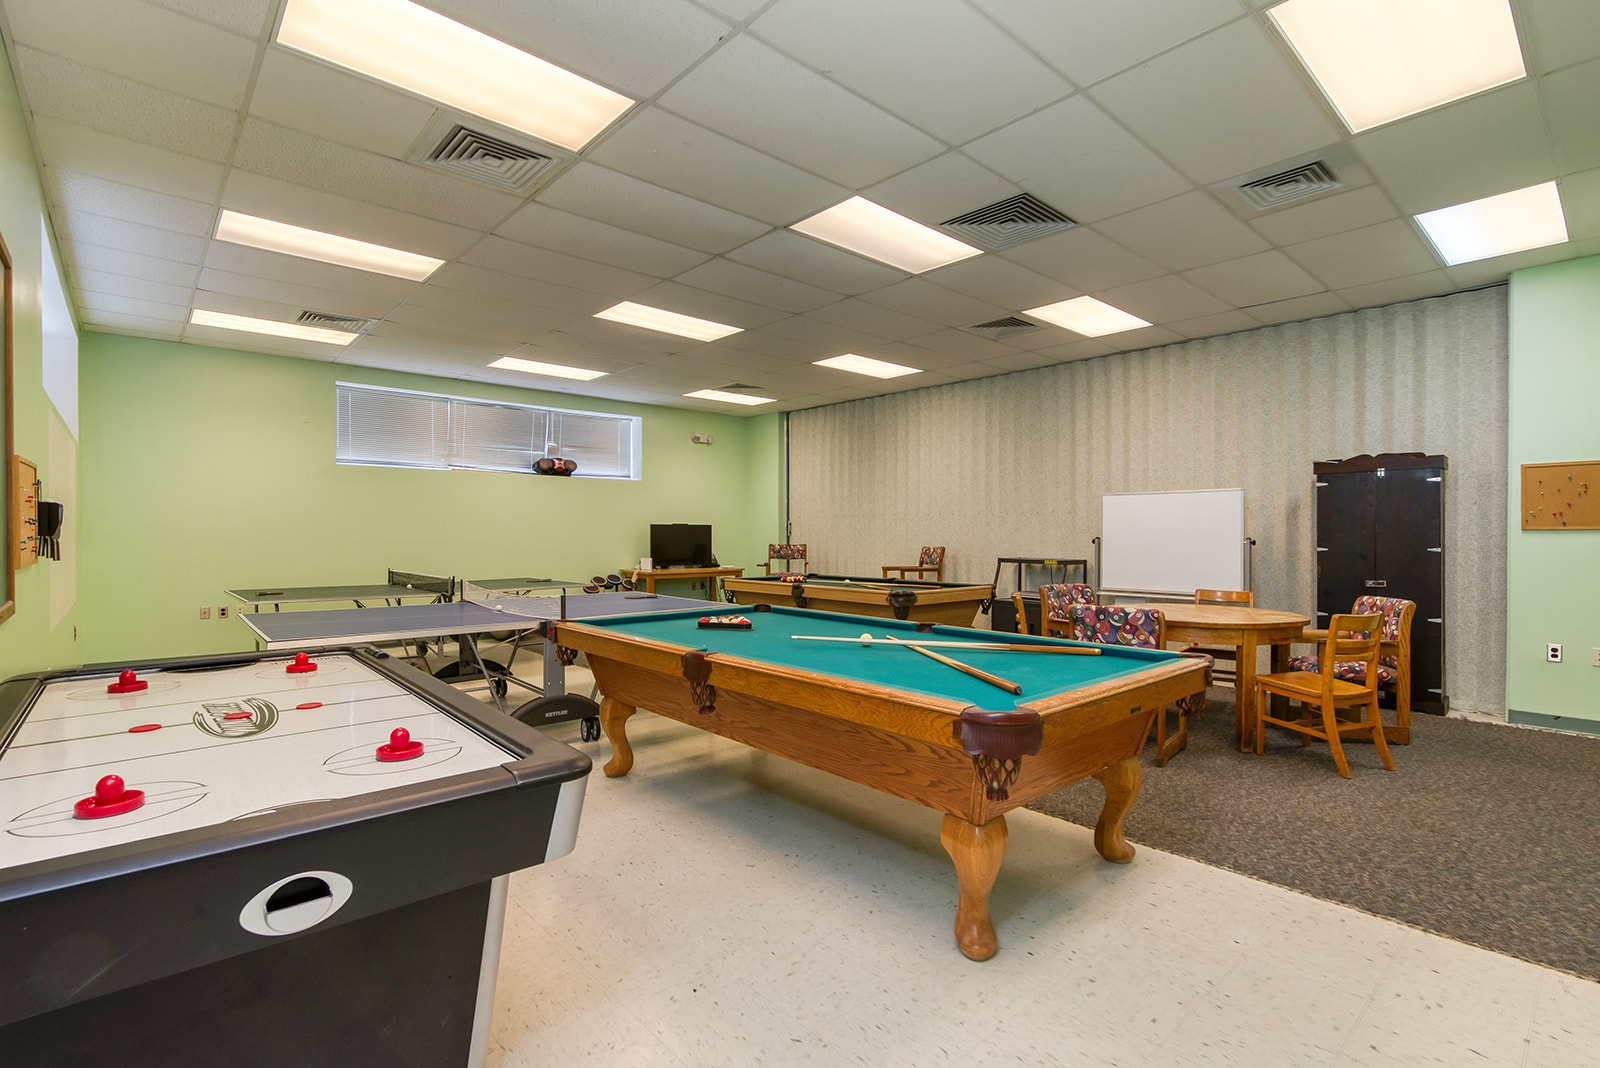 Image of a multipurpose game room with pool and air hockey tables.